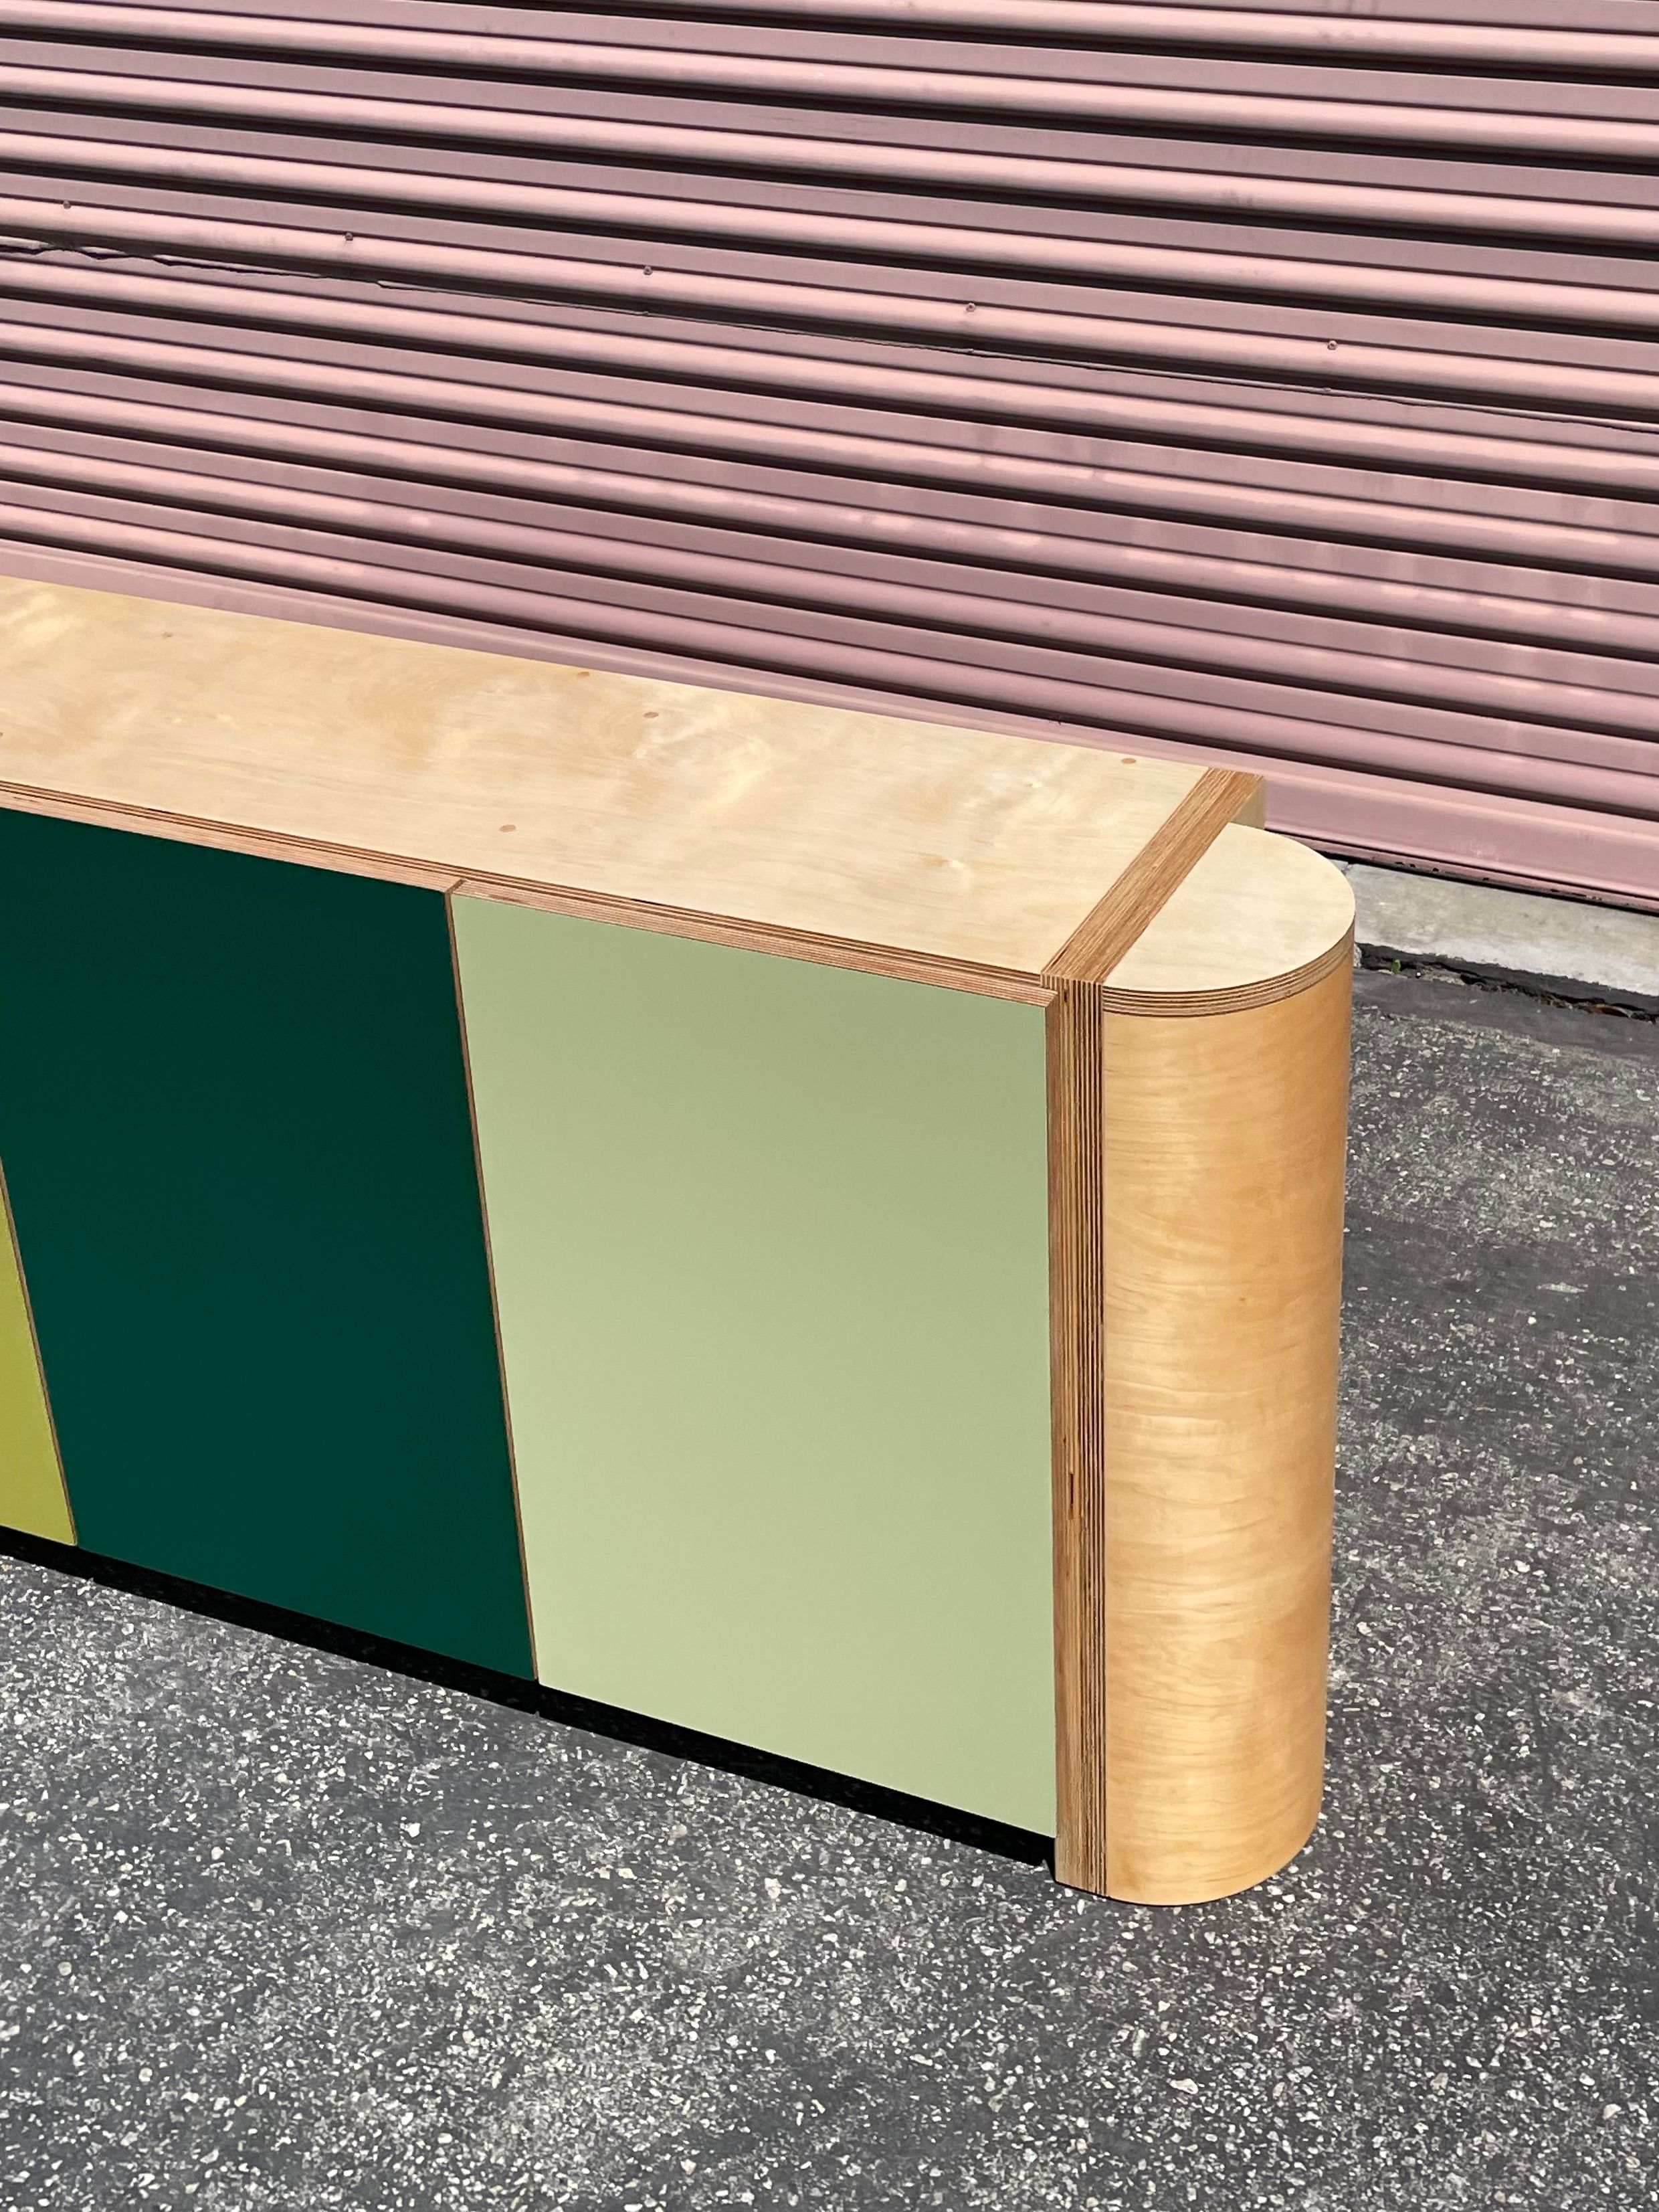  Color Block Console II product image 6